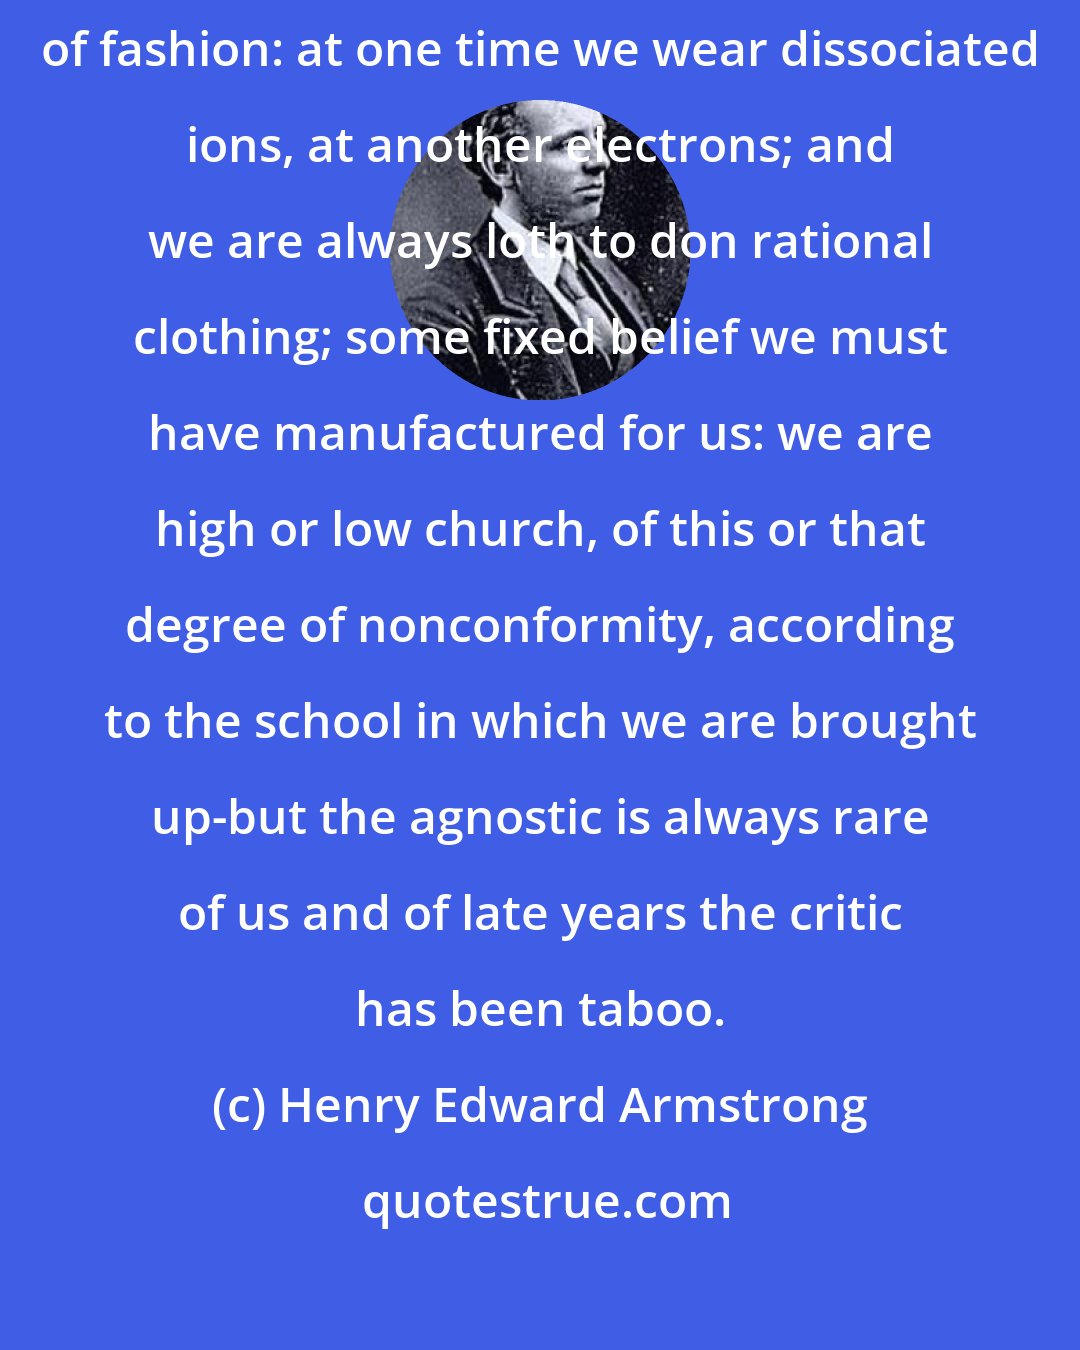 Henry Edward Armstrong: After all, we scientific workers ... like women, are the victims of fashion: at one time we wear dissociated ions, at another electrons; and we are always loth to don rational clothing; some fixed belief we must have manufactured for us: we are high or low church, of this or that degree of nonconformity, according to the school in which we are brought up-but the agnostic is always rare of us and of late years the critic has been taboo.